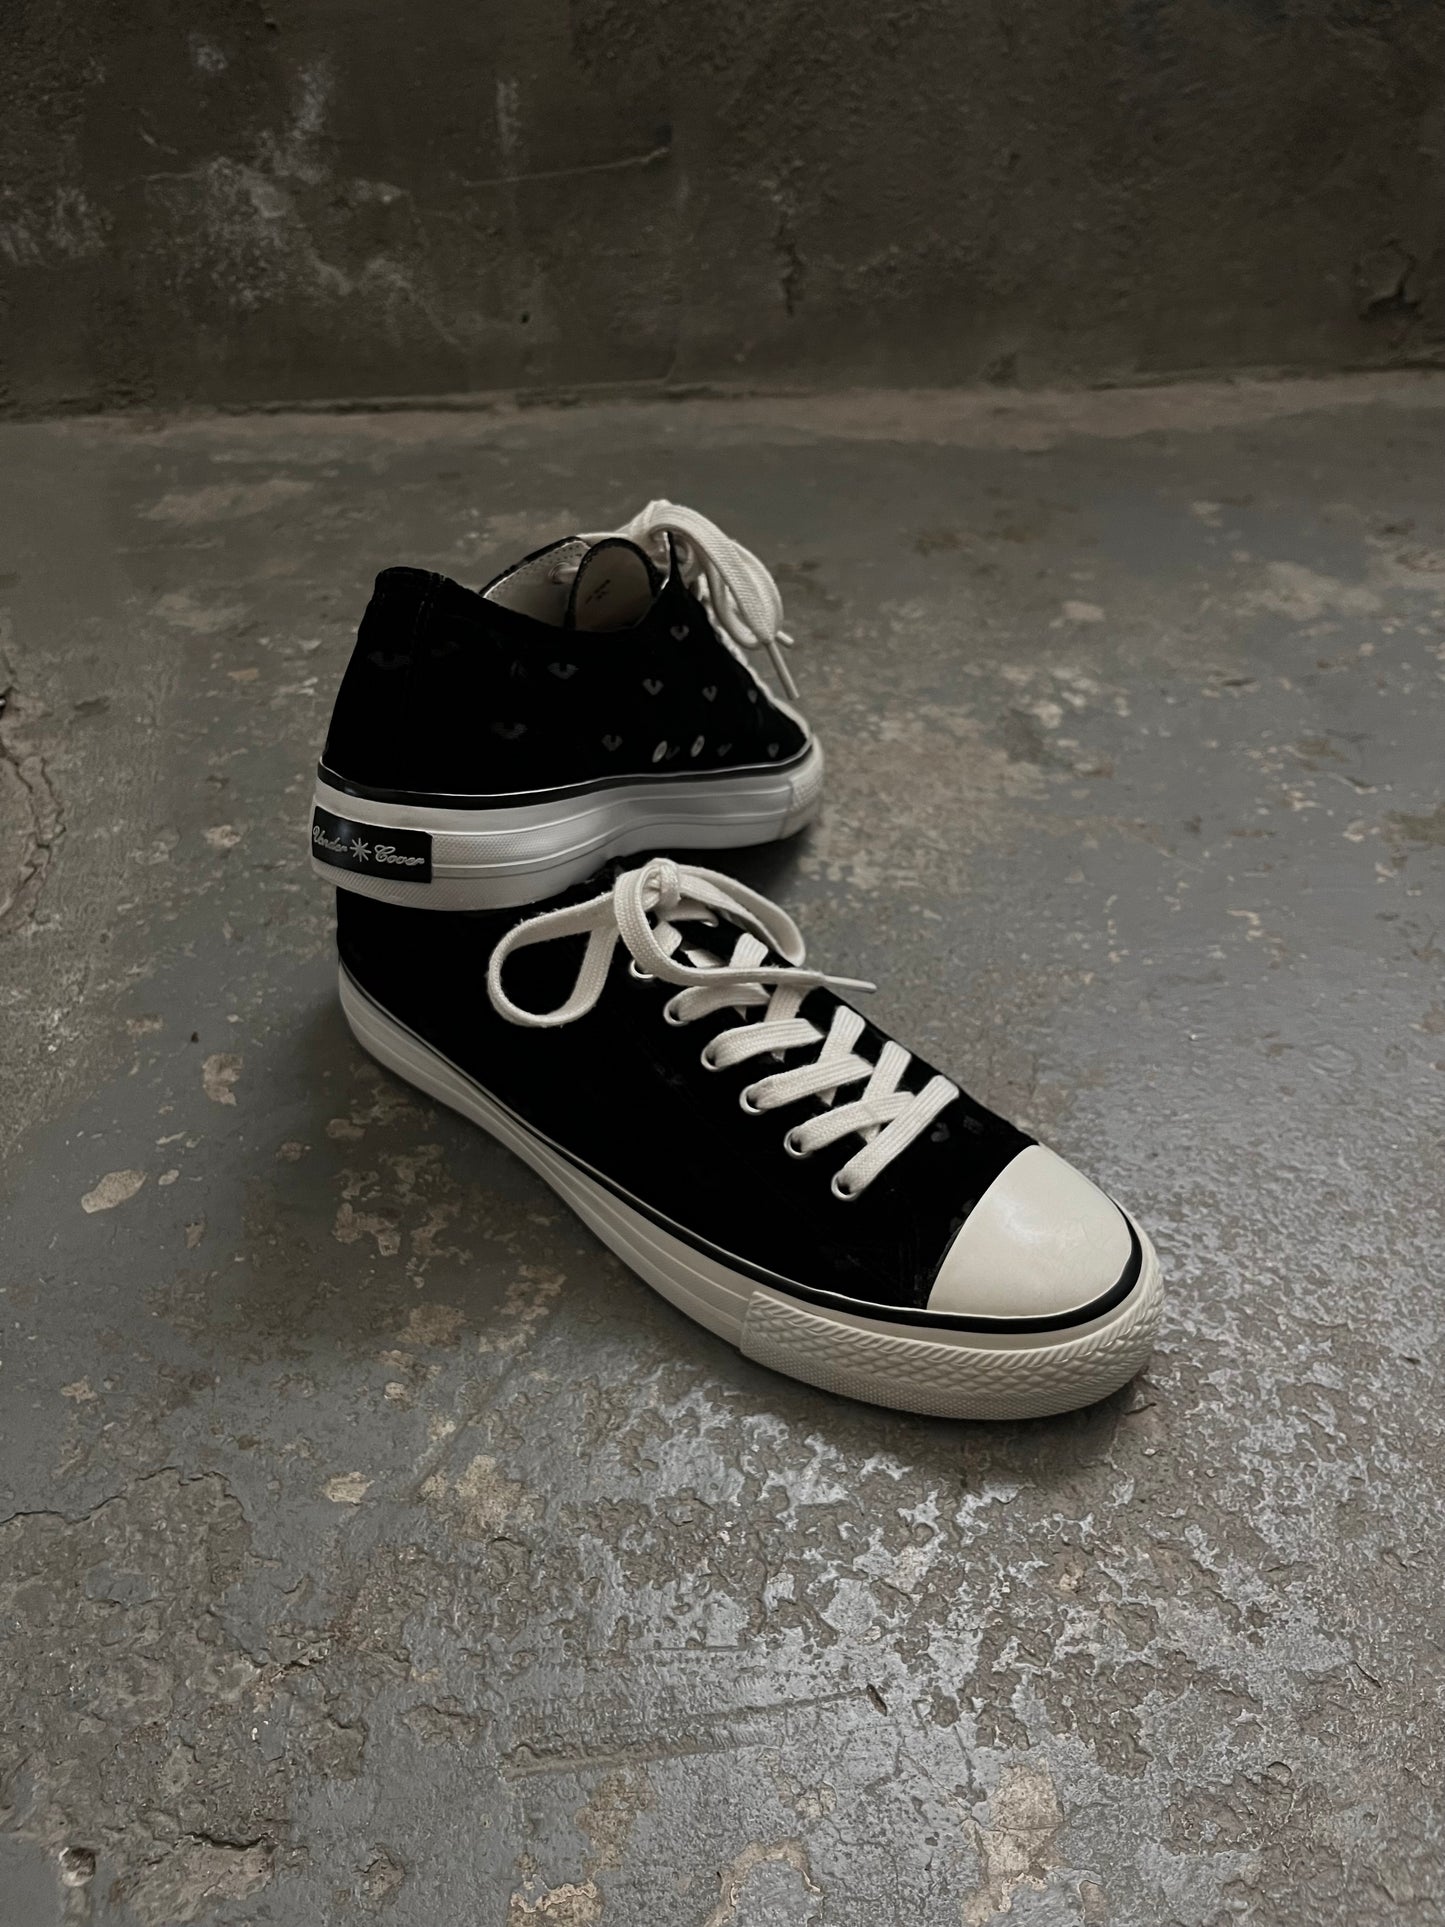 Undercover AW02 “Witches Cell Division” Bat Velour “chucks”